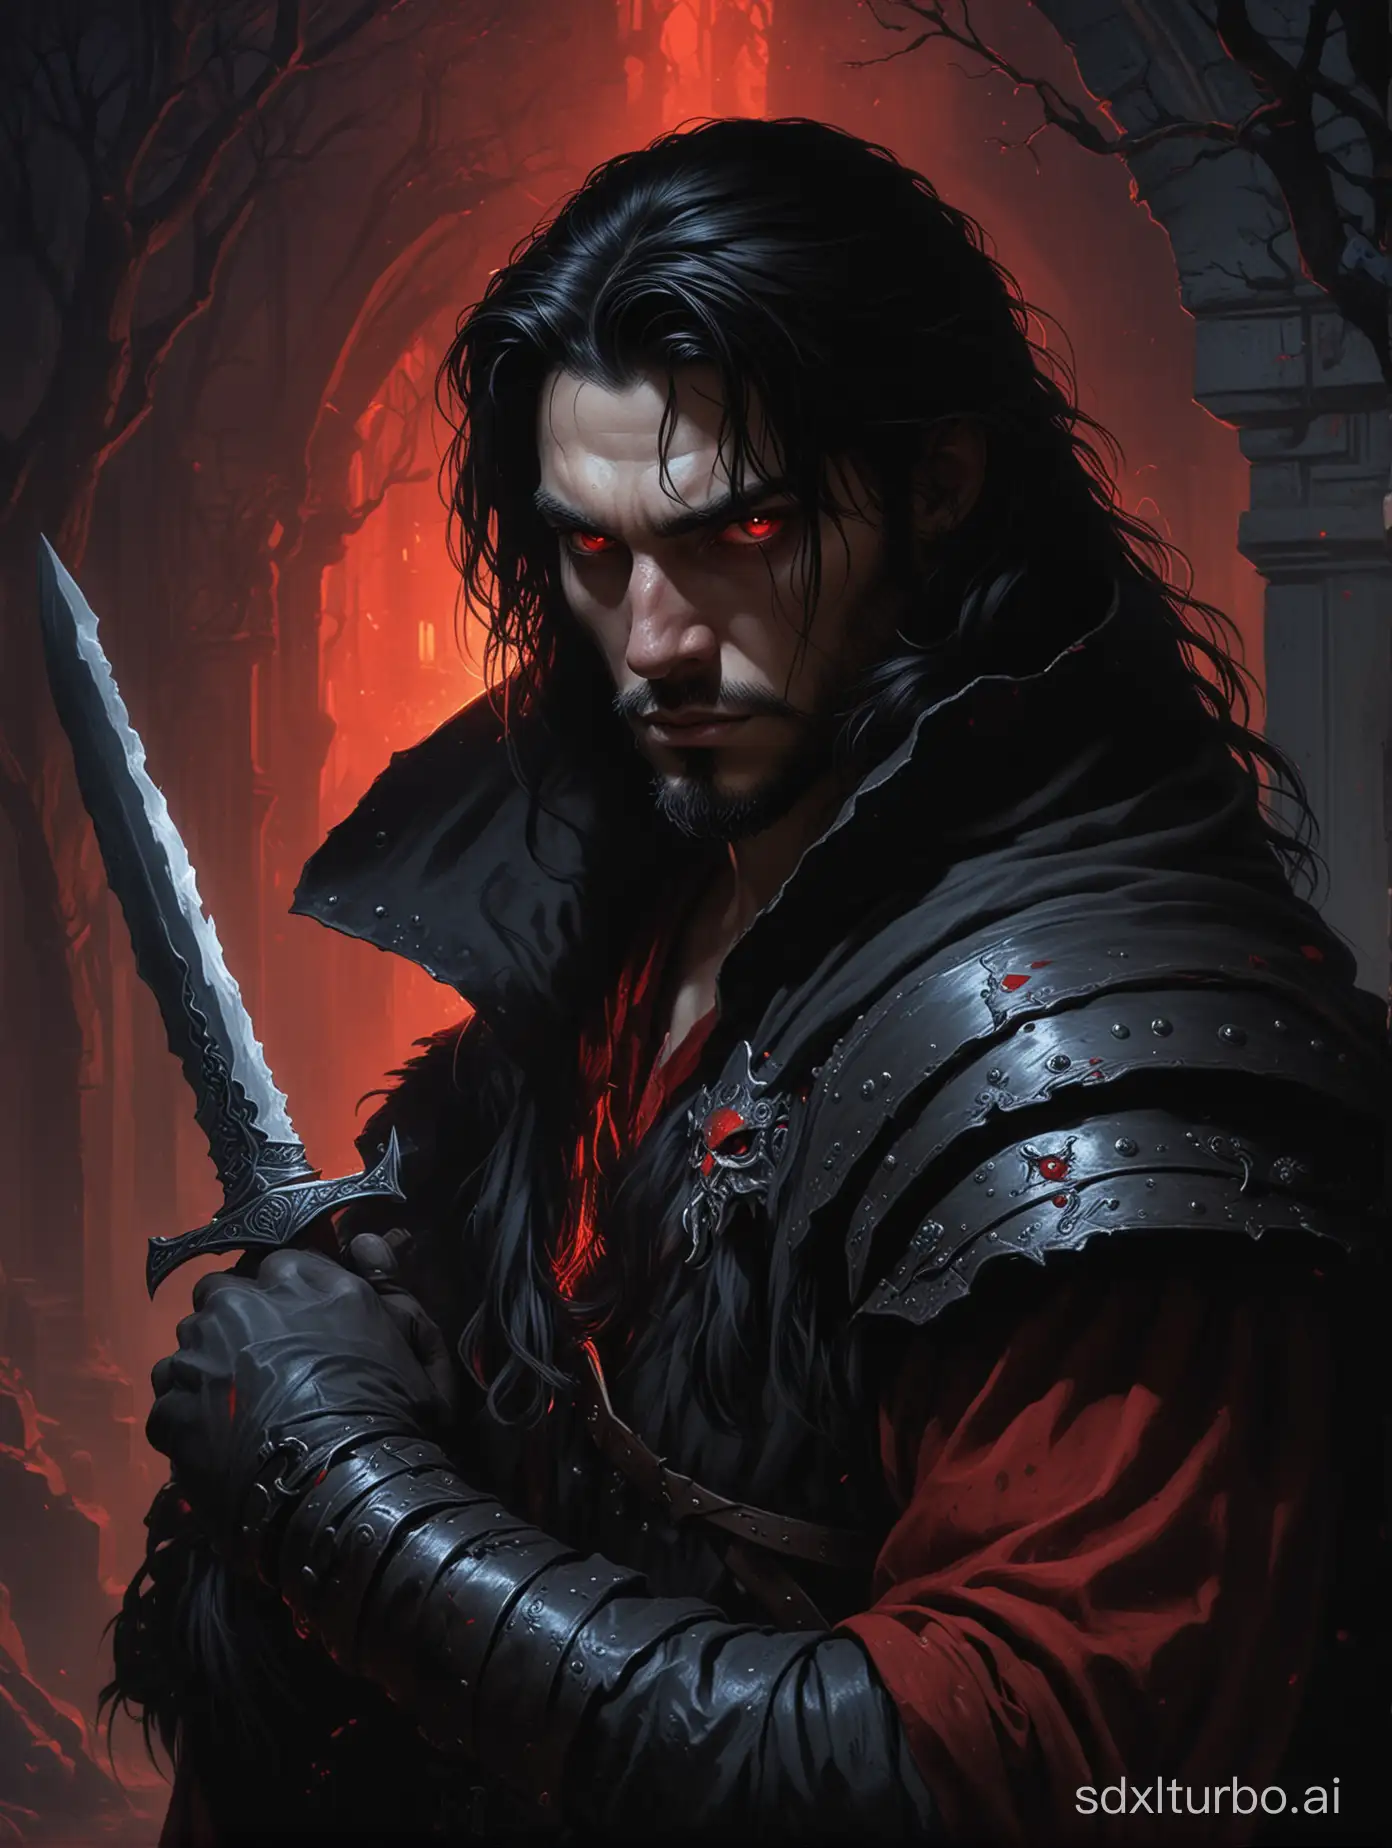 Medieval assassin with knife long black hair and a beardless, handsome face stands in a dark shadow background, his snow white skin illuminated by the red glow of his eyes. On his shoulder sits a one shadow imp creature with red eyes, The entire scene is captured in an oil painting, giving it a timeless and mysterious quality.